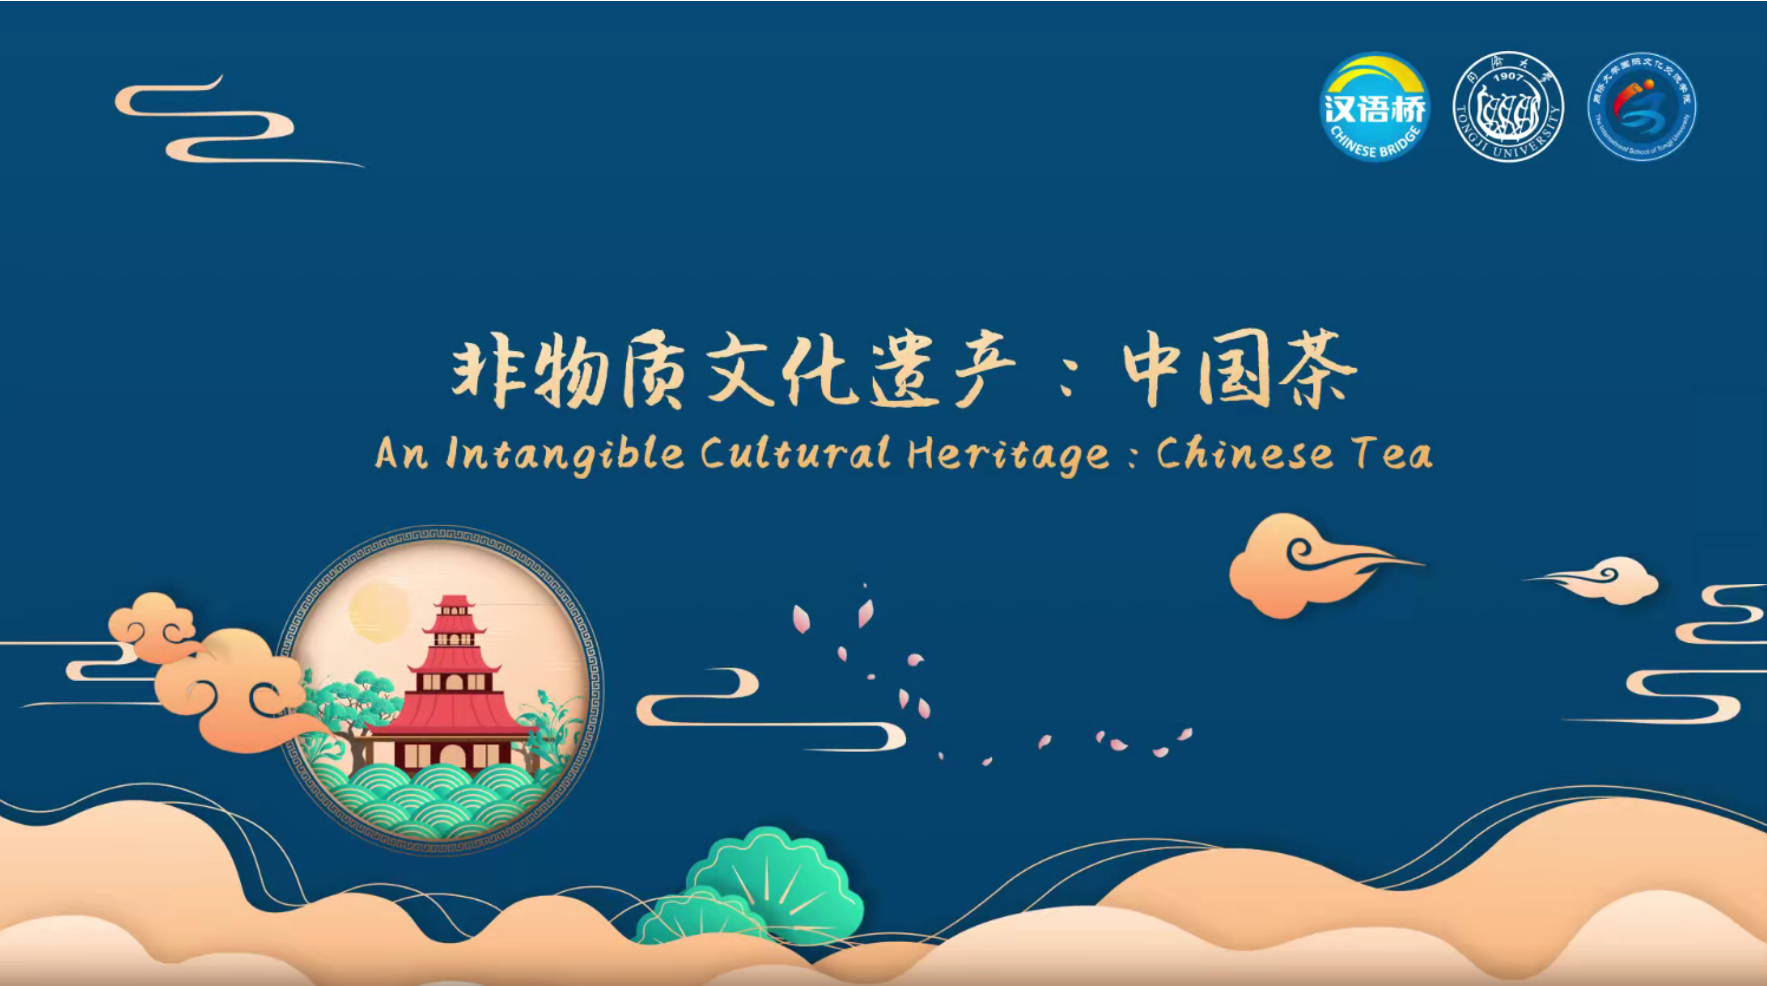 An Intangible Cultural Heritage: Chinese Tea